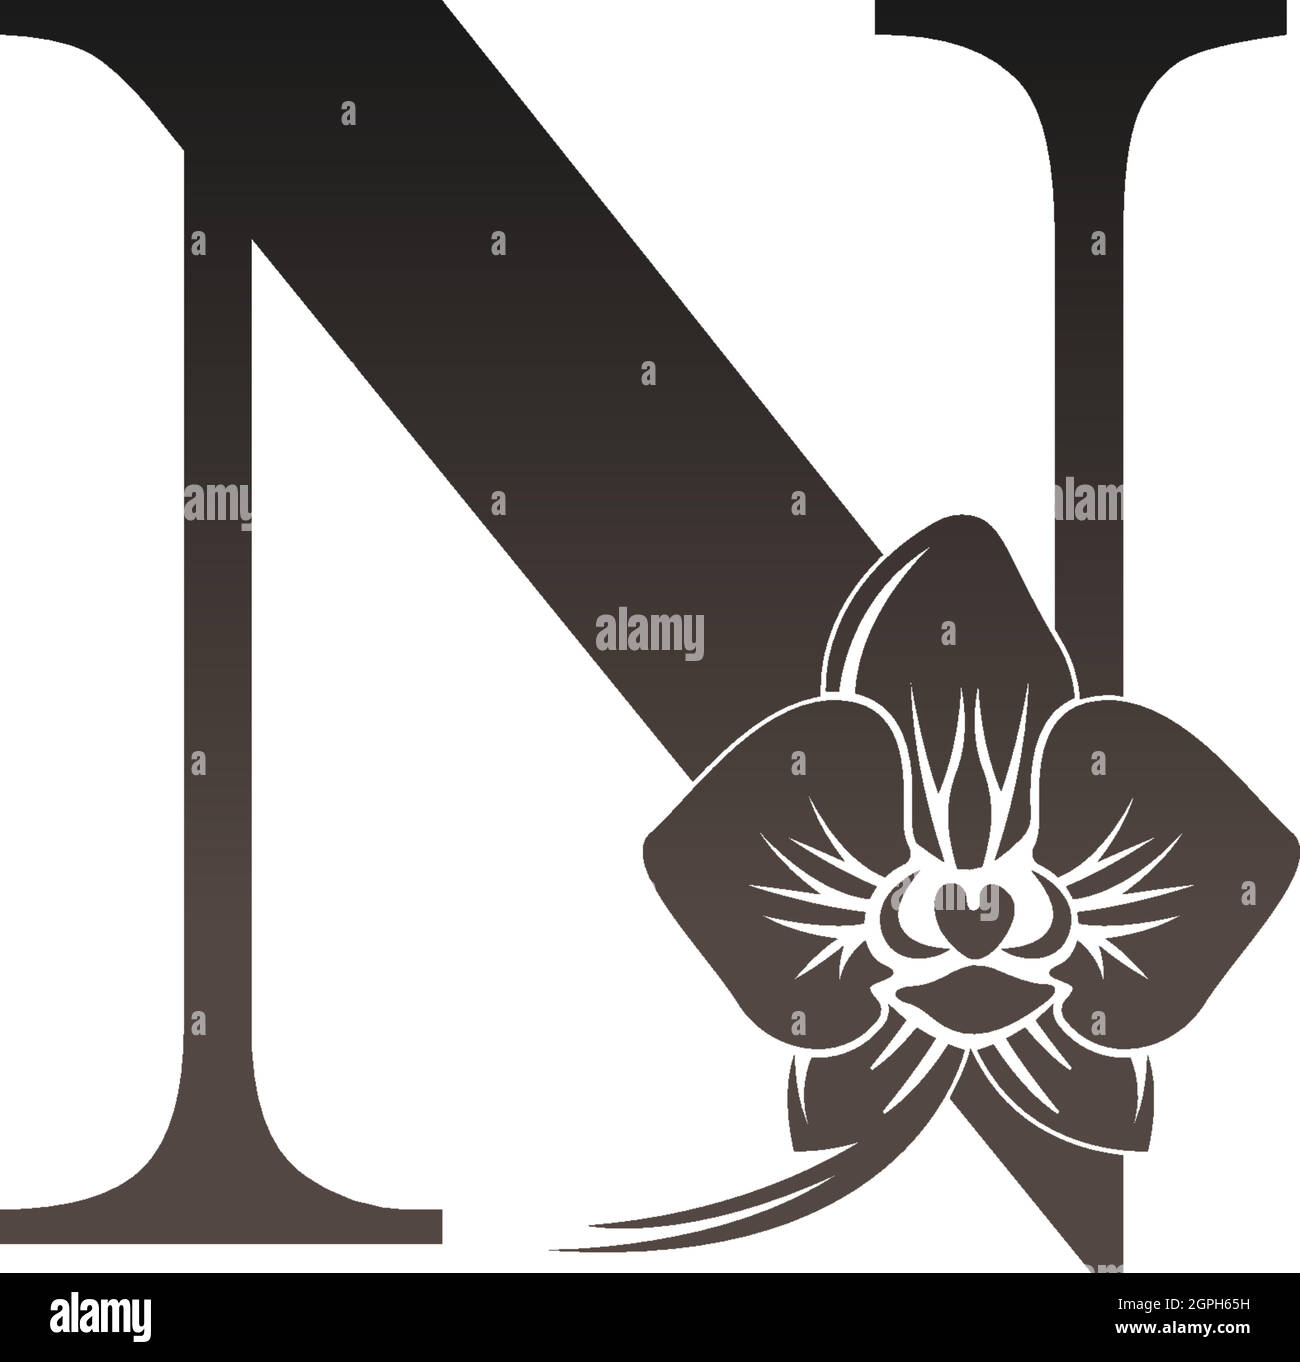 Letter N logo icon with black orchid design vector Stock Vector